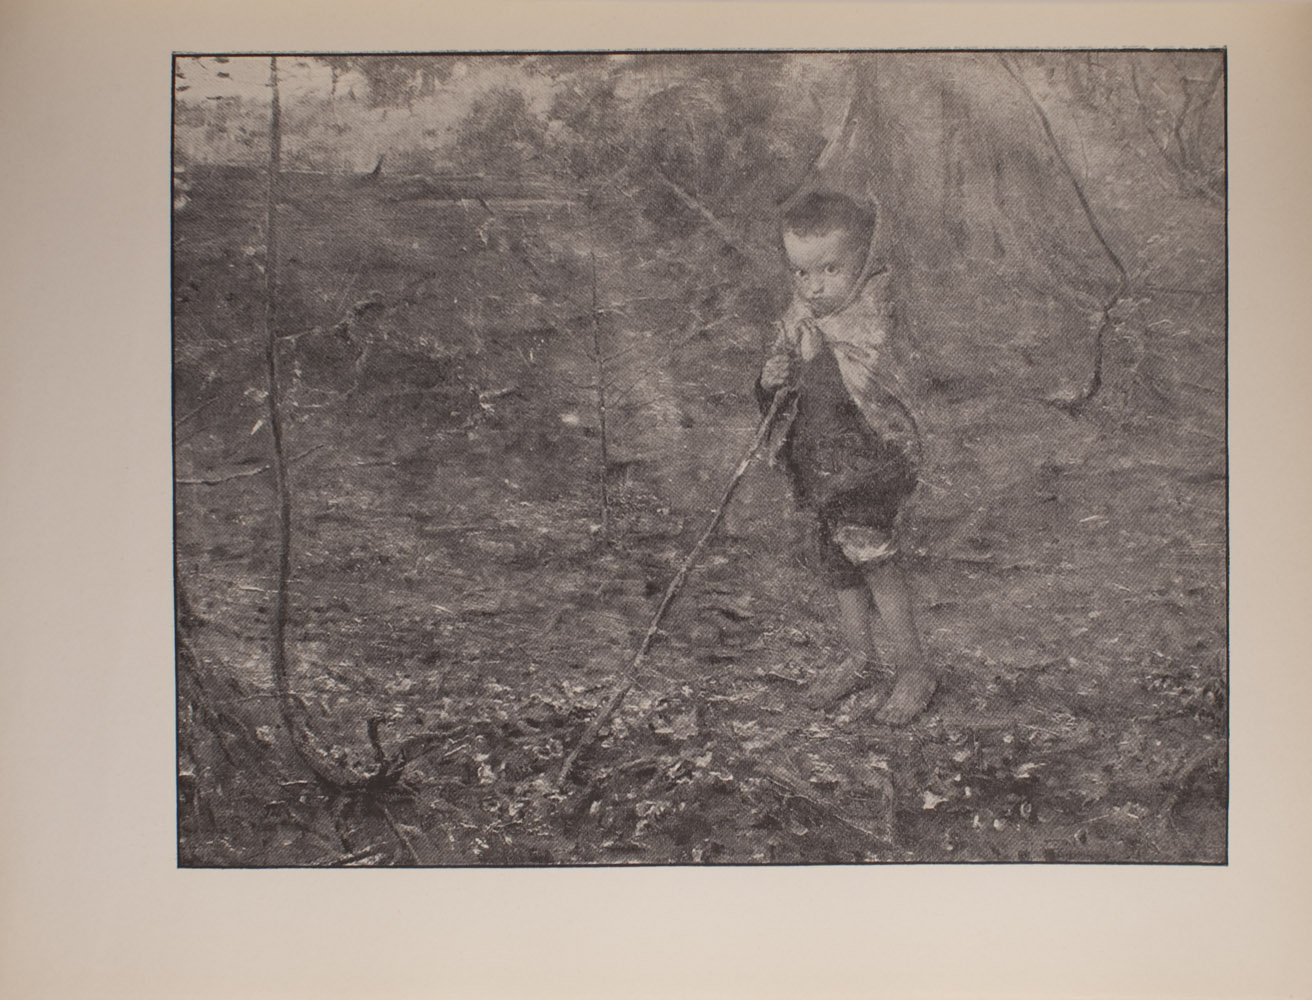 The image is of a young boy in a wooded area The boy stands barefoot holding a long stick that extends diagonally to the left He is wearing pants which are rolled up to his knees and appears to have a scarf or blanket wrapped around his shoulders and the back of his head The boy faces the viewer The image is horizontally displayed